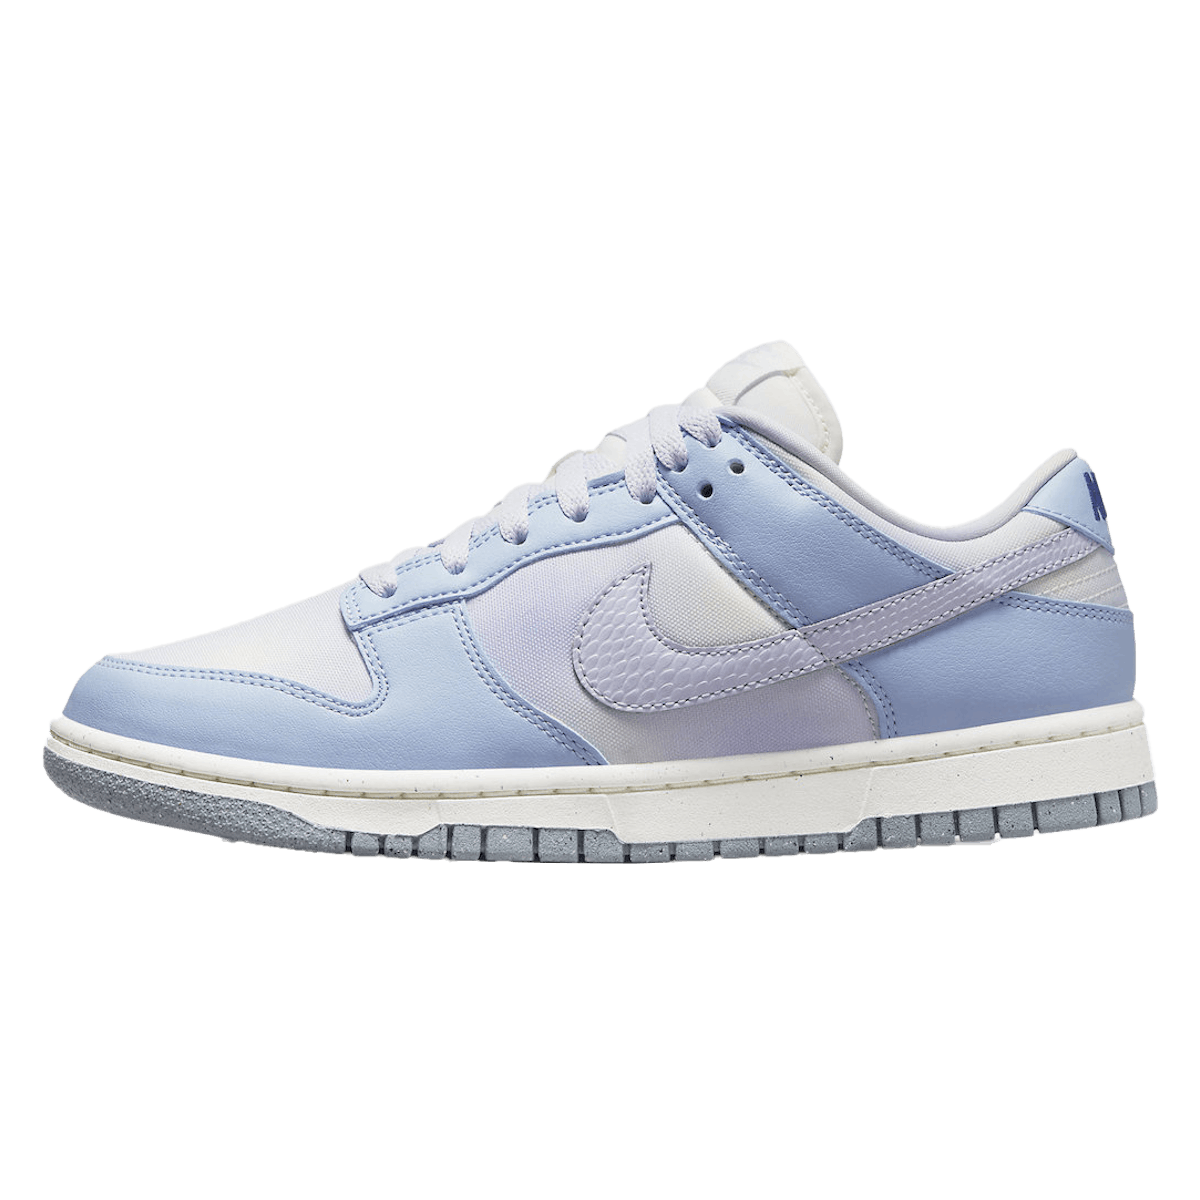 Nike Dunk Low Wmns "Blue Airbrush"